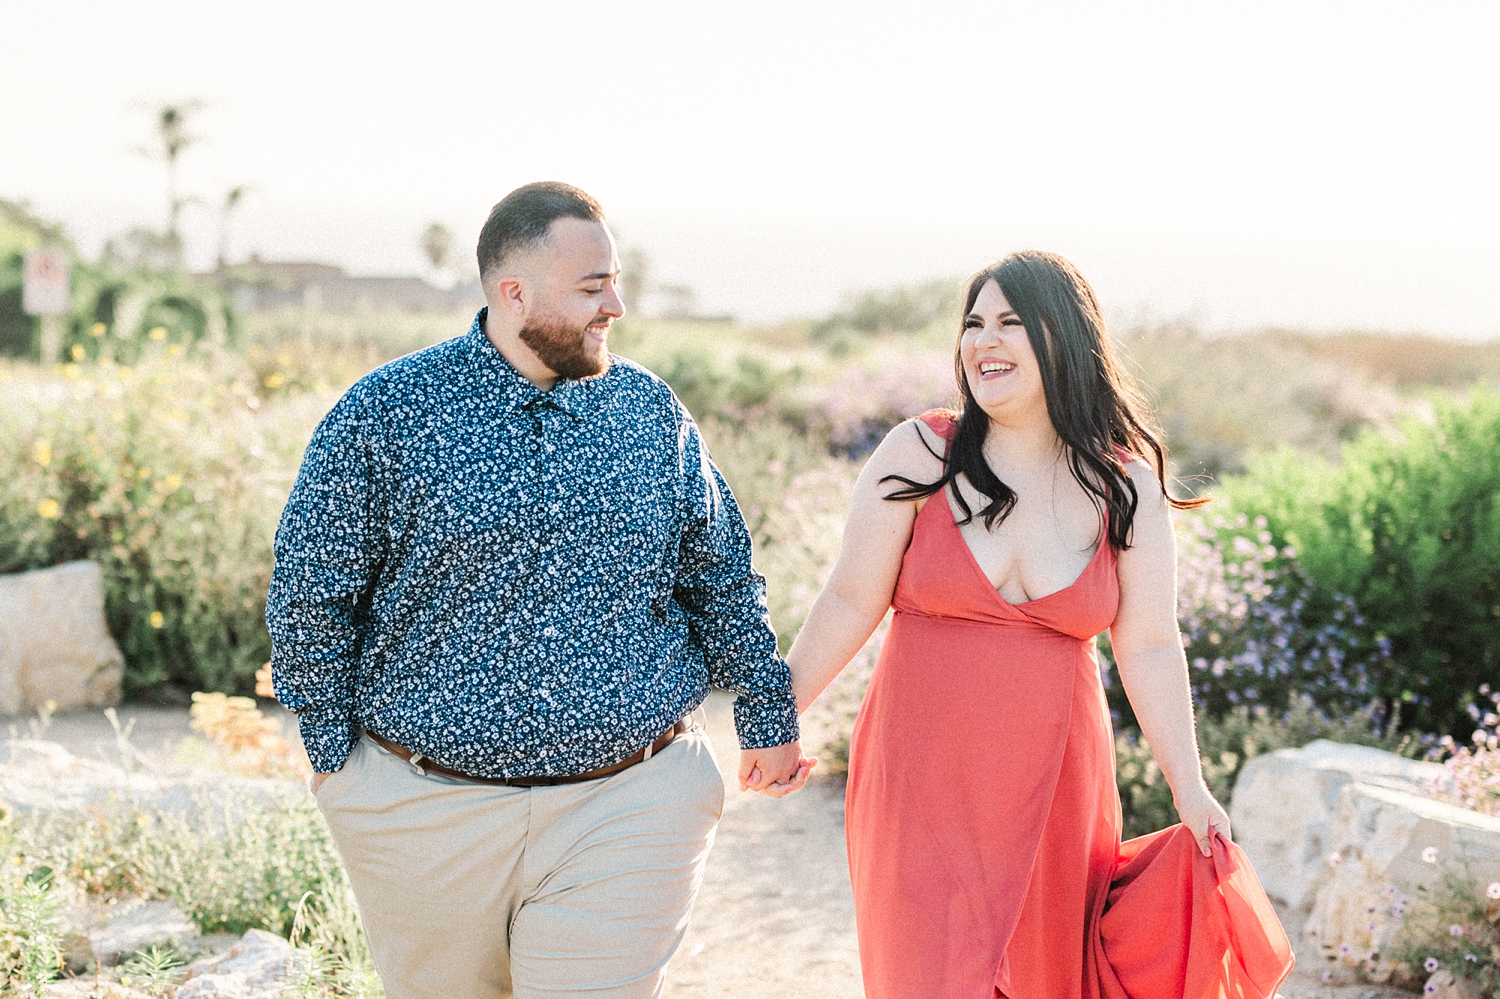 Beach Cliffs Engagement Session at Sunset | Nataly Hernandez Photography | Edwin and Susana-26.jpg